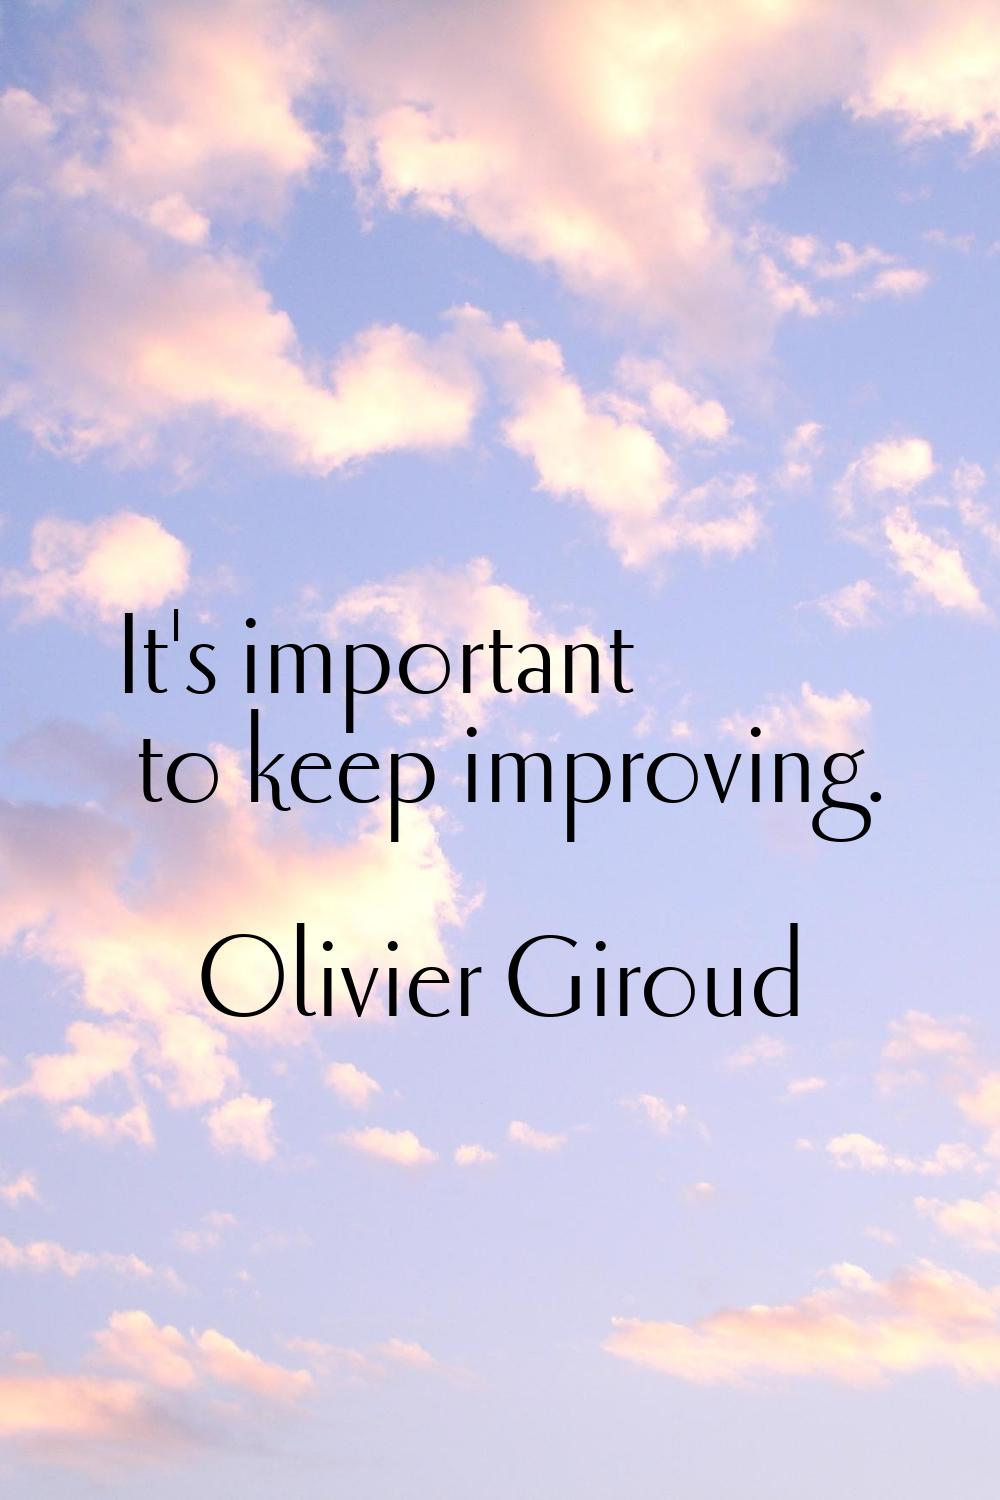 It's important to keep improving.